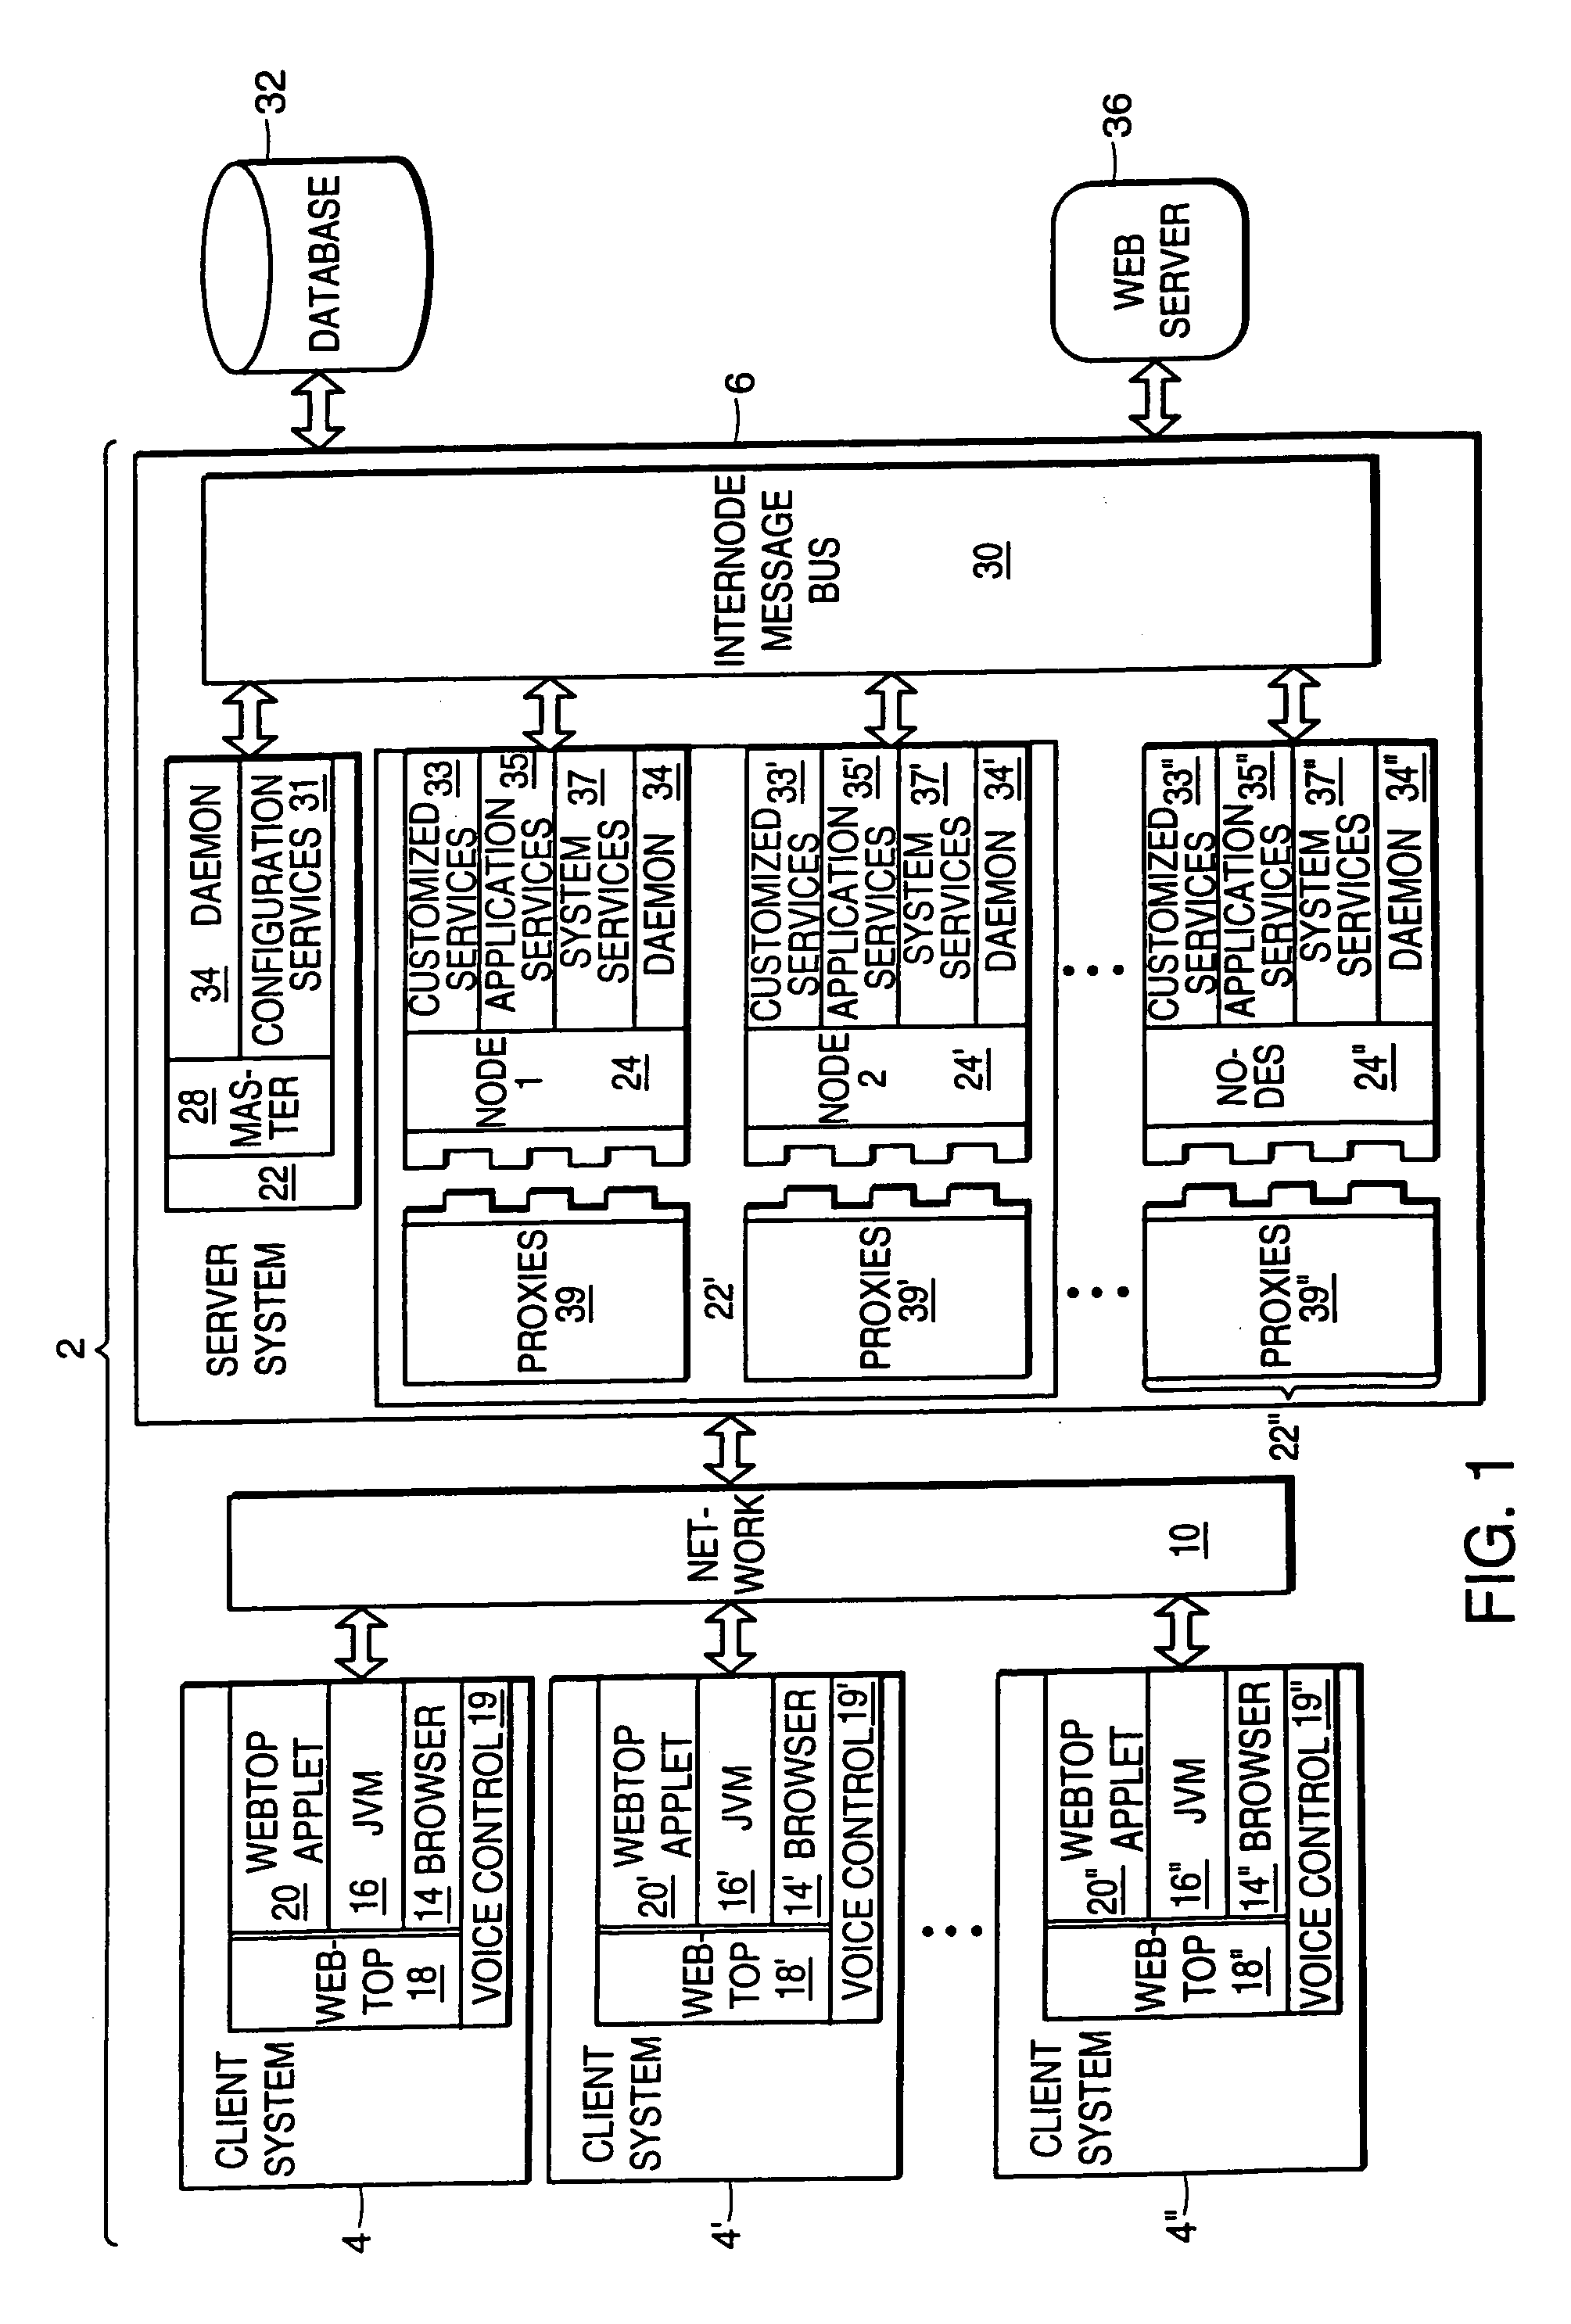 Learning activity platform and method for teaching a foreign language over a network